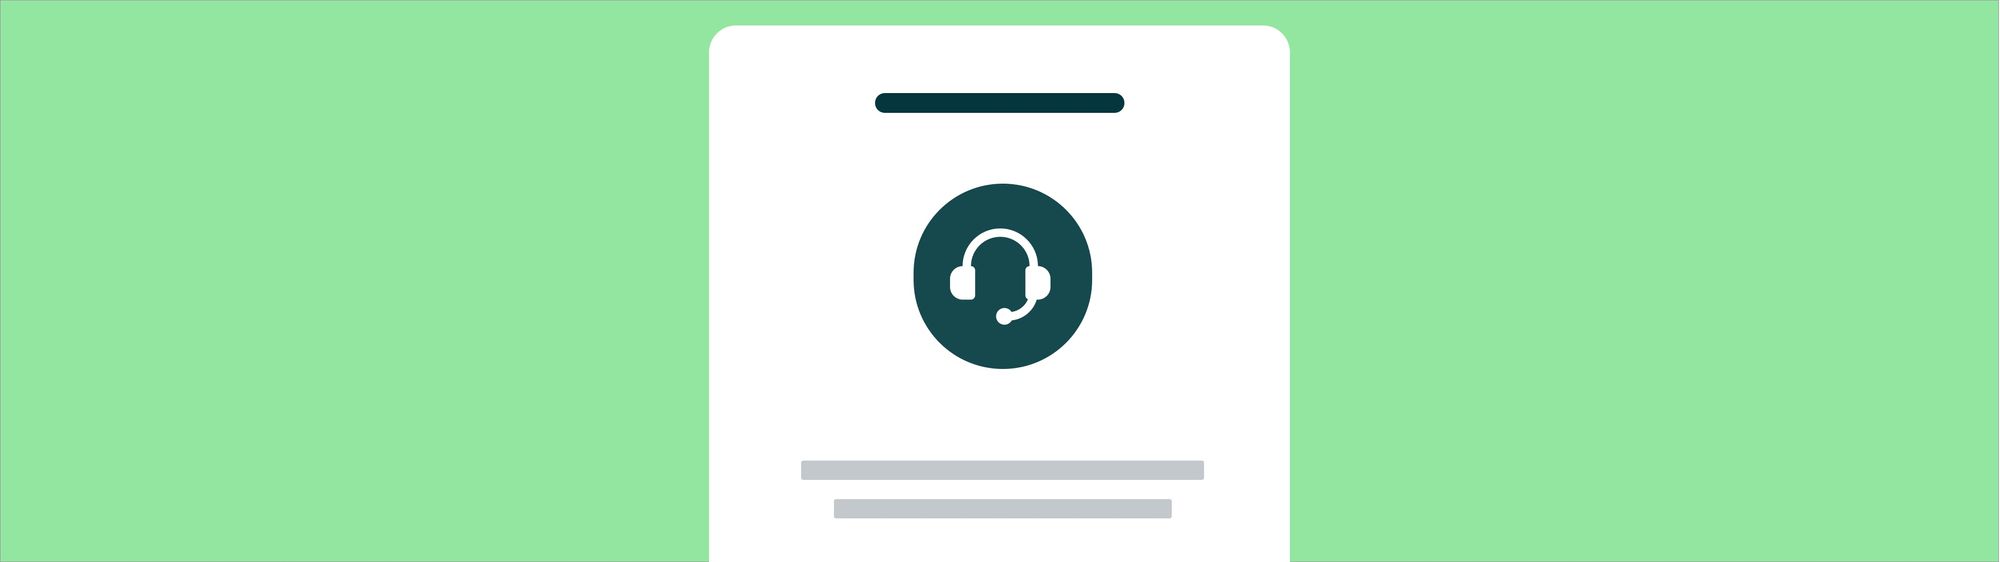 Voice API powered by Zendesk Messaging